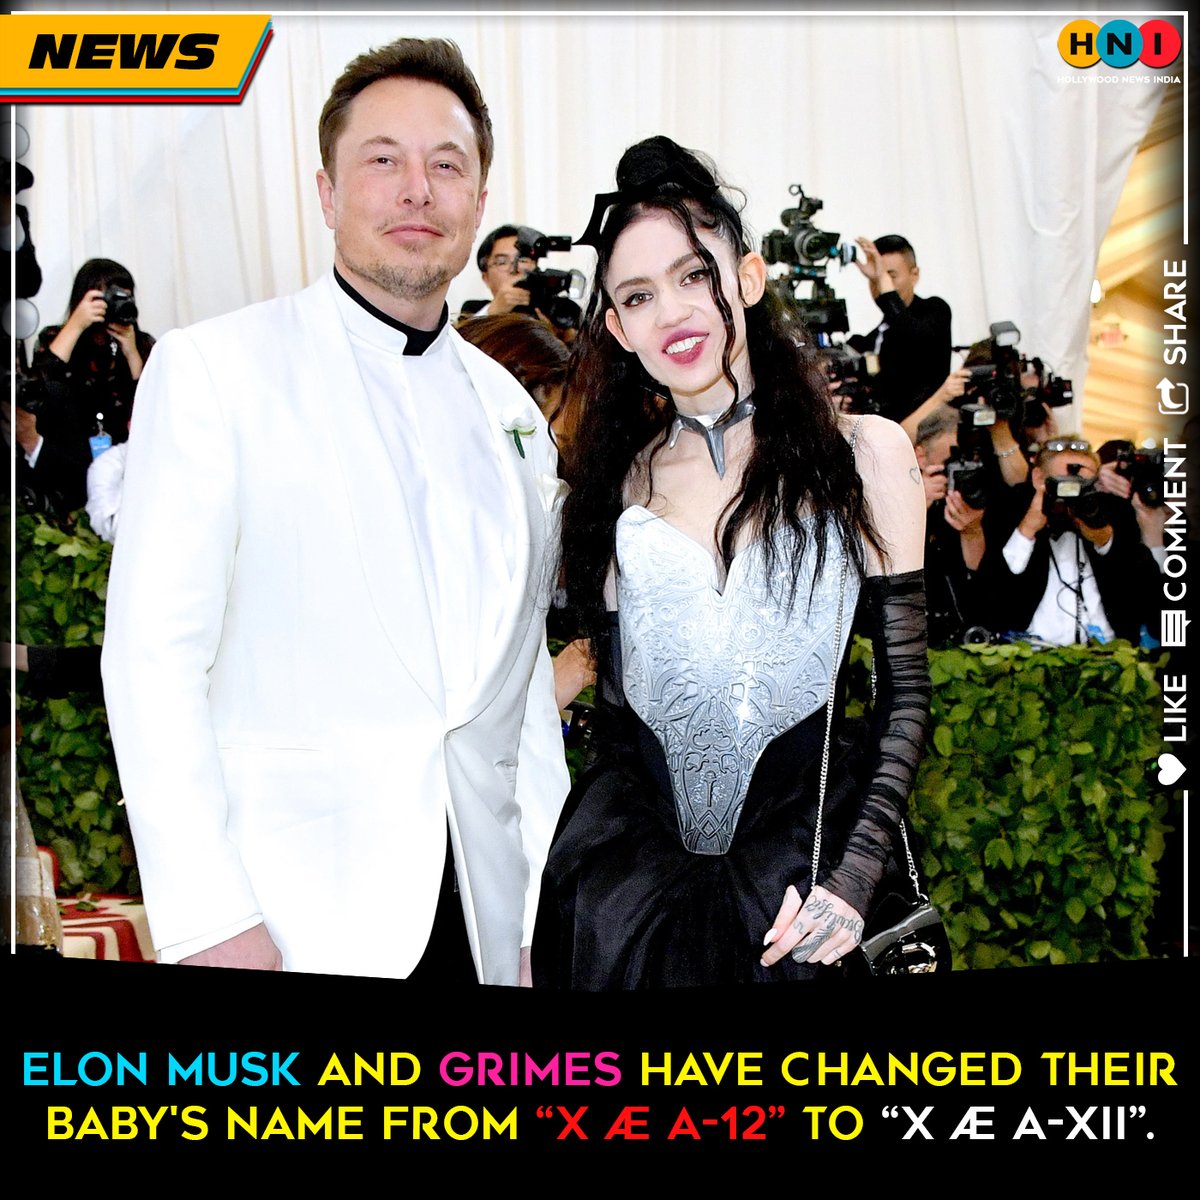 Hollywoodnewsin Usunited Elonmusk And Grimes Grimezsz Have Had To Change The Name Of Their Baby Son From X Ae A 12 To X Ae A Xii More Details T Co Ib3stgafwl Elonmusk Xaea12